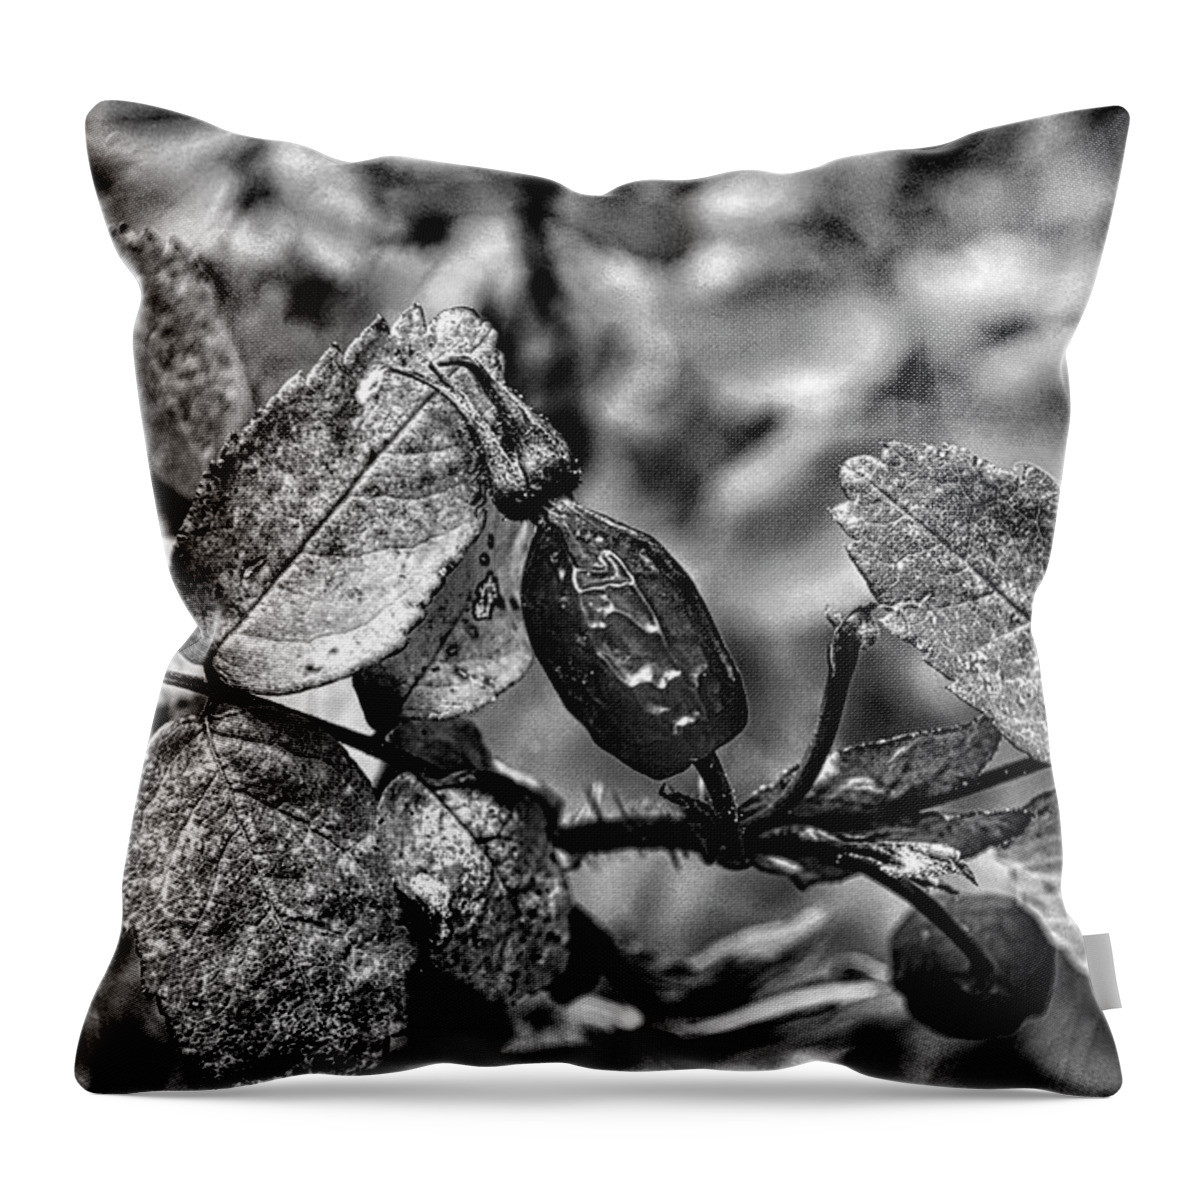 Rosehip Throw Pillow featuring the photograph Rose Hip Monochrome by Cathy Mahnke